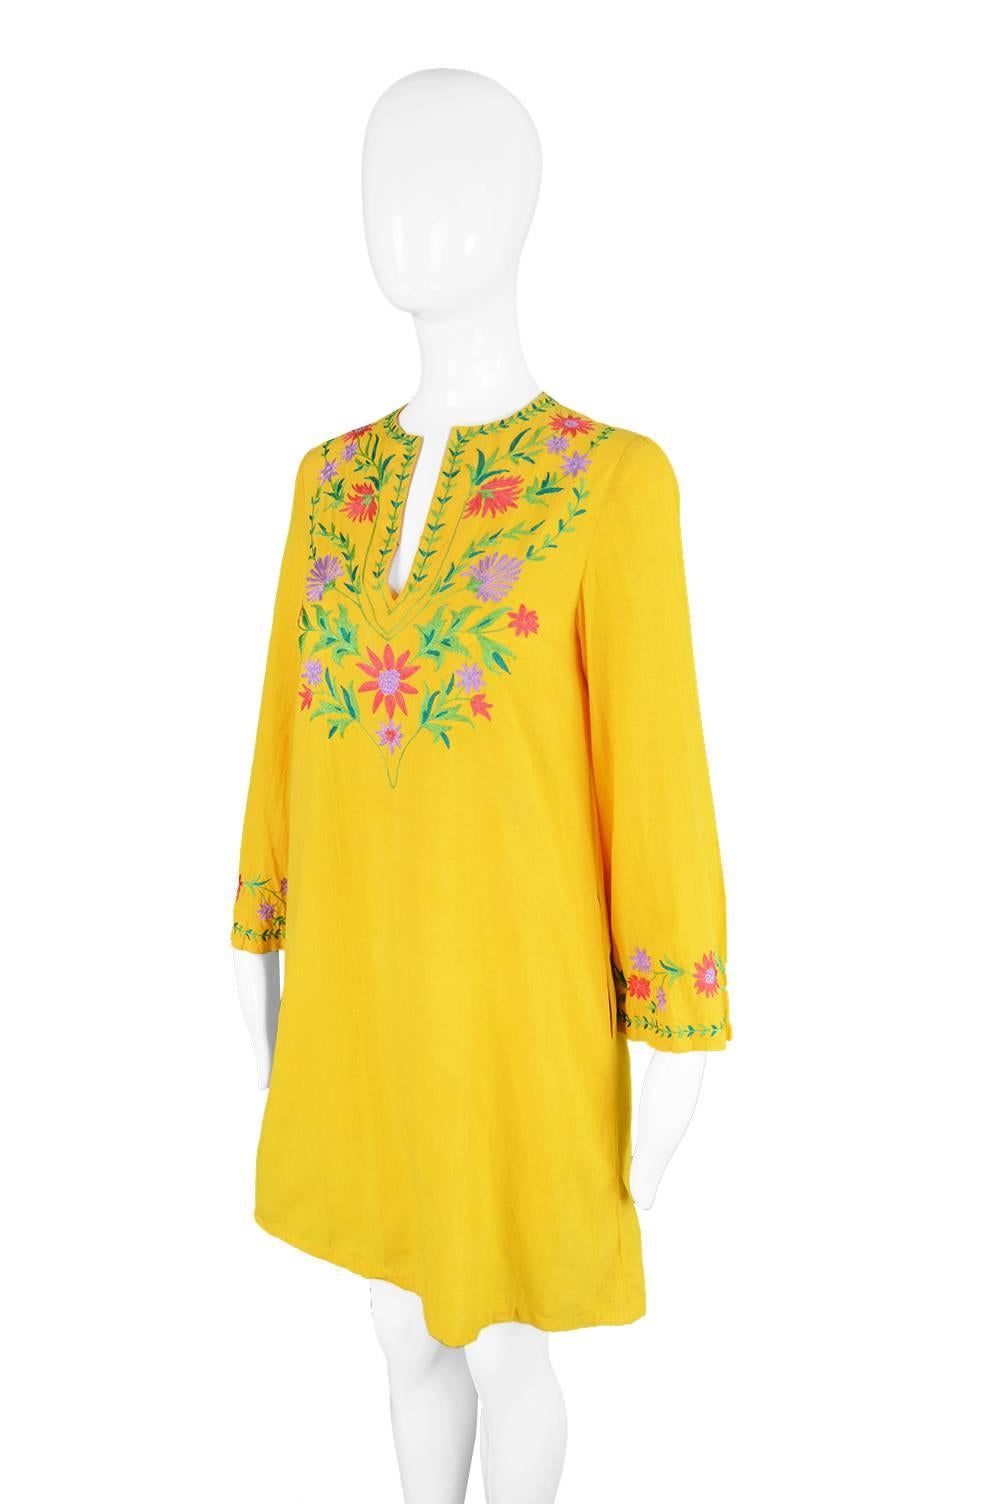 Treacy Lowe Mustard Yellow Hand Embroidered Indian Cotton Mini Dress, 1970s For Sale 1